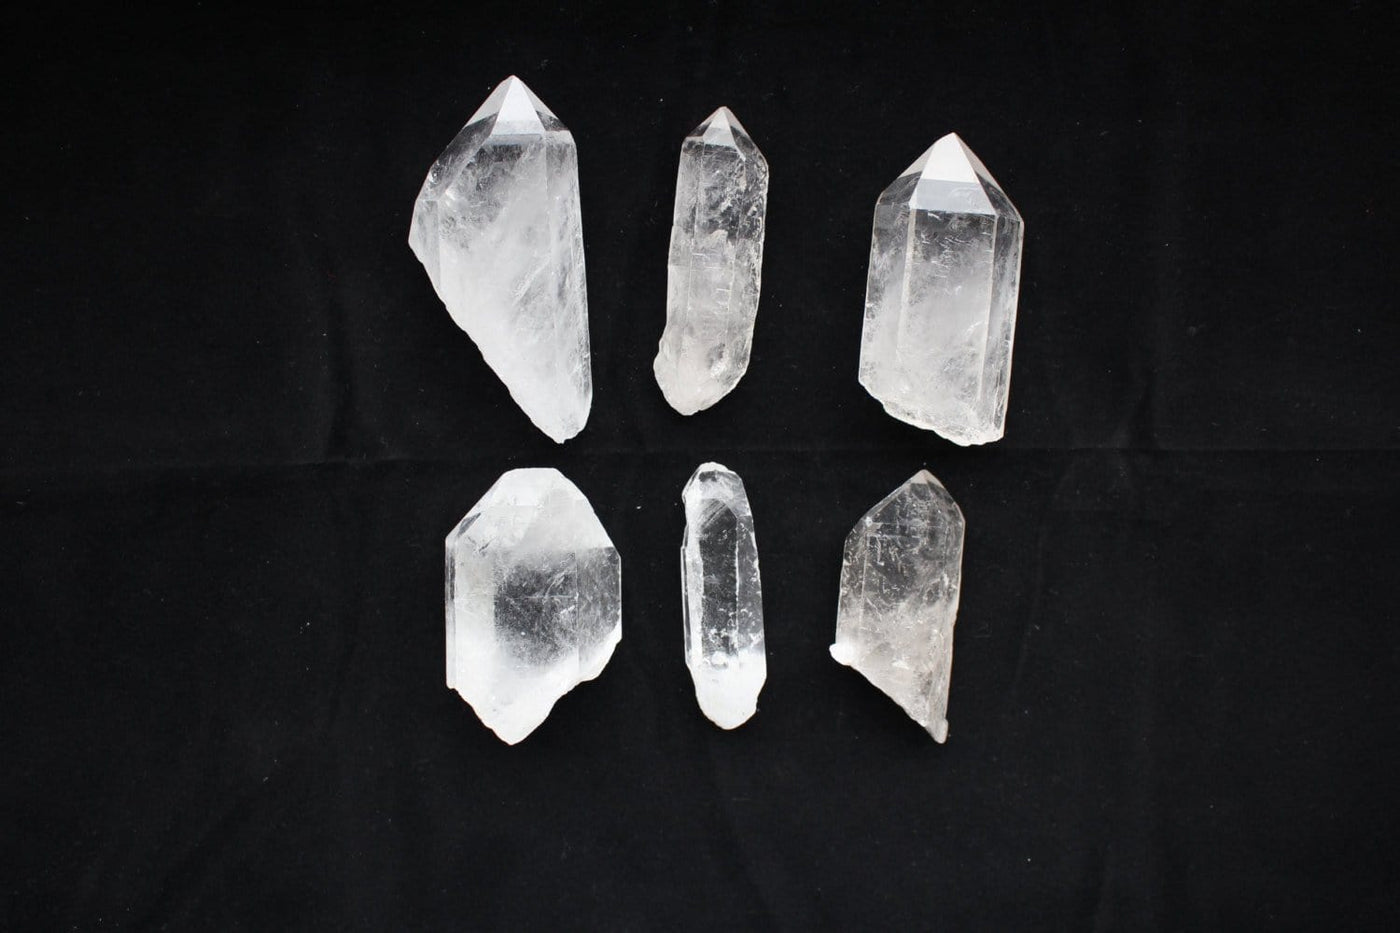 Six Crystal Point 5-8cm on a black background